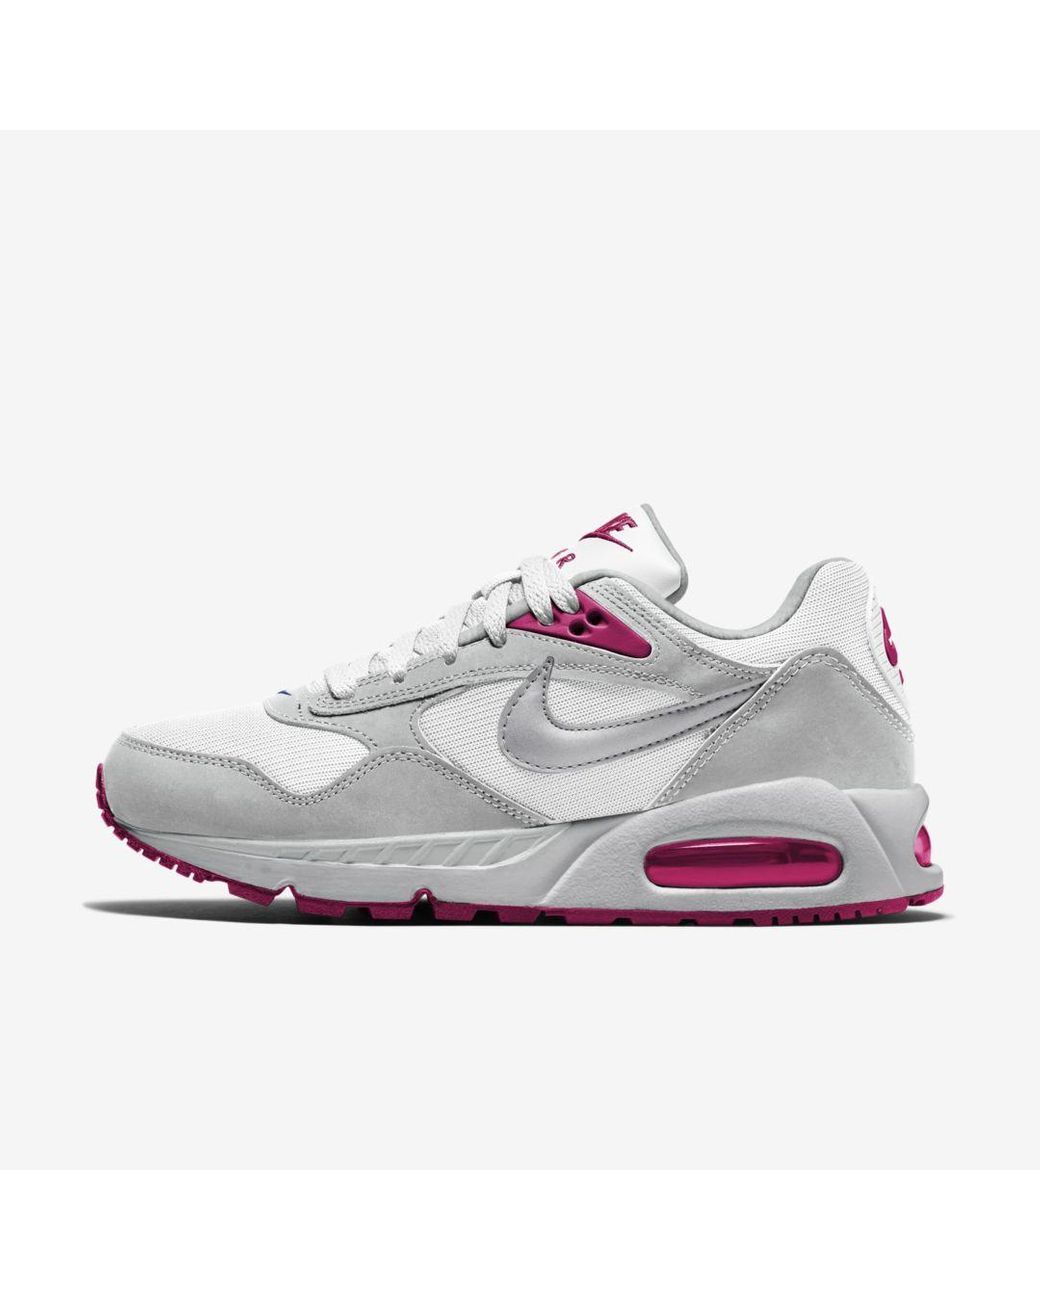 Nike Rubber Air Max Correlate Shoes in White - Lyst